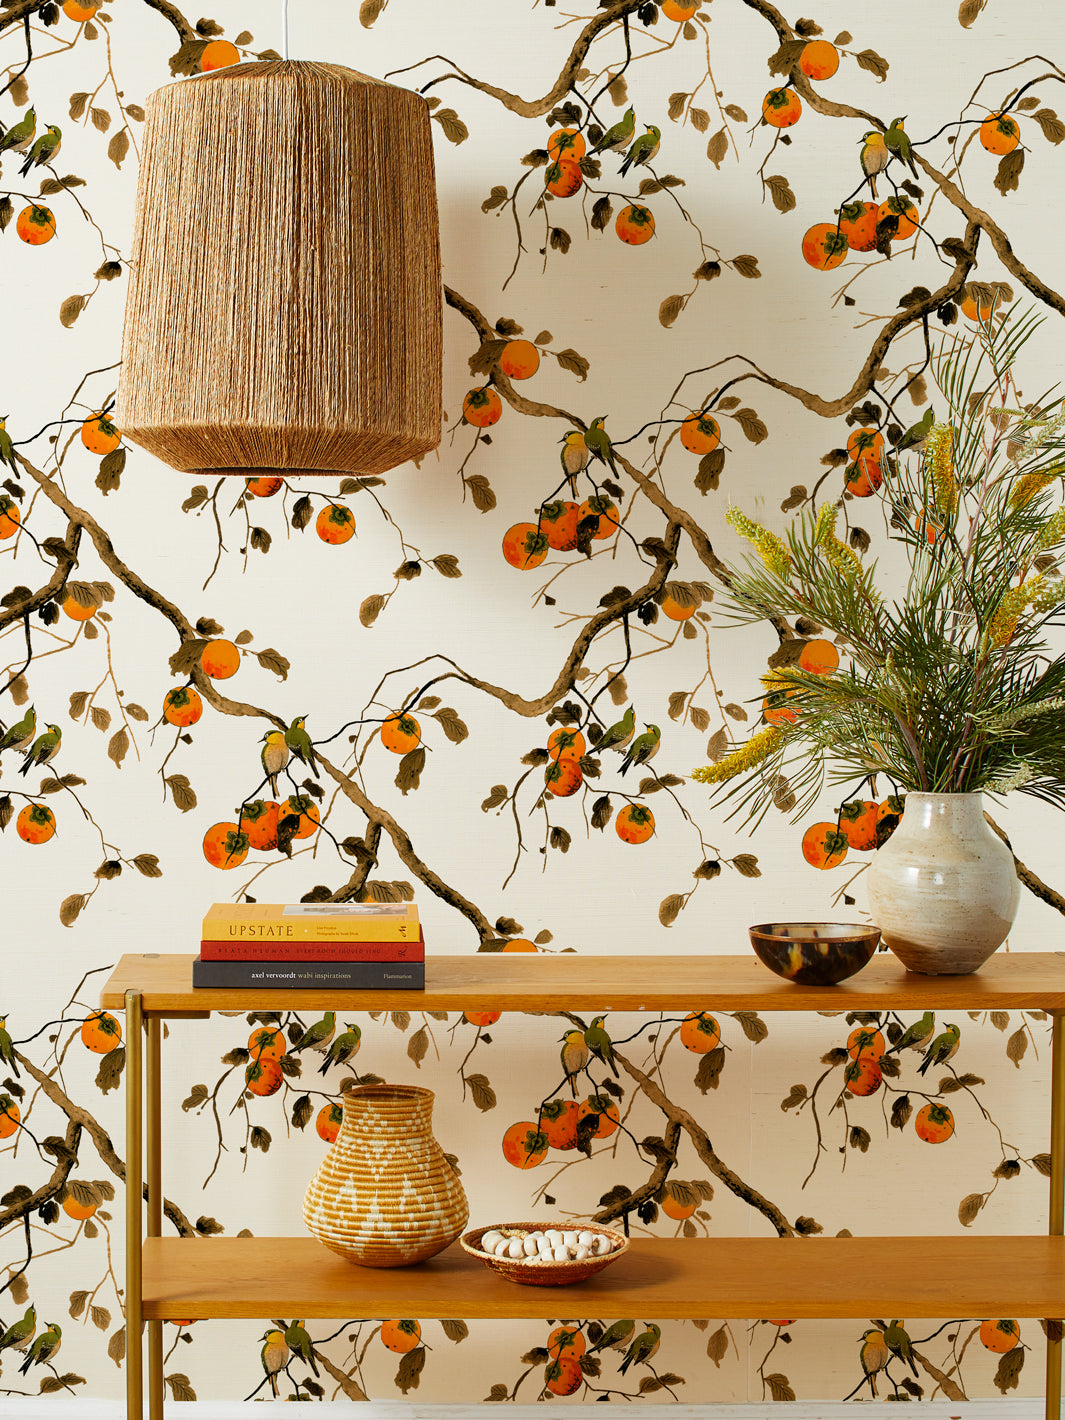 'Persimmon Birds' Grasscloth' Wallpaper by Nathan Turner - Persimmon